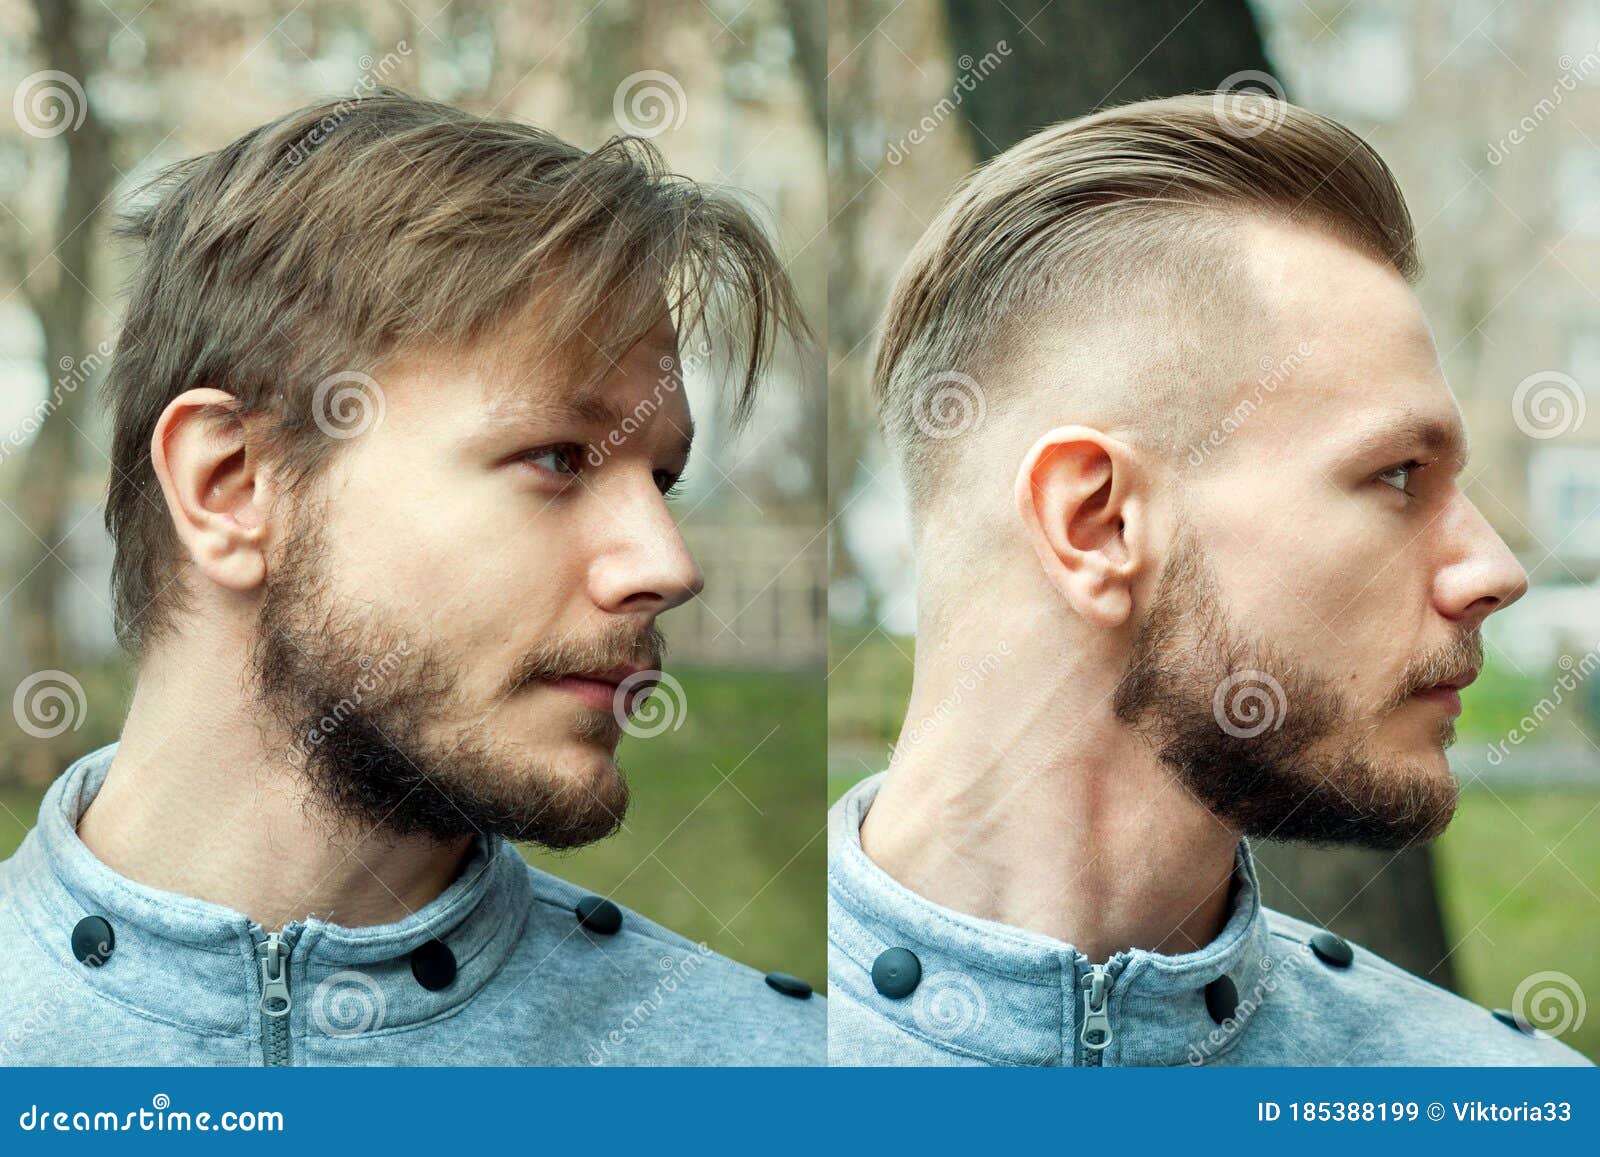 Bald Man before after Haircut Concept for a Barber Shop: the Problem Man of  Hair Loss, Alopecia, Transplantation, Side Stock Image - Image of shirt,  face: 185388199